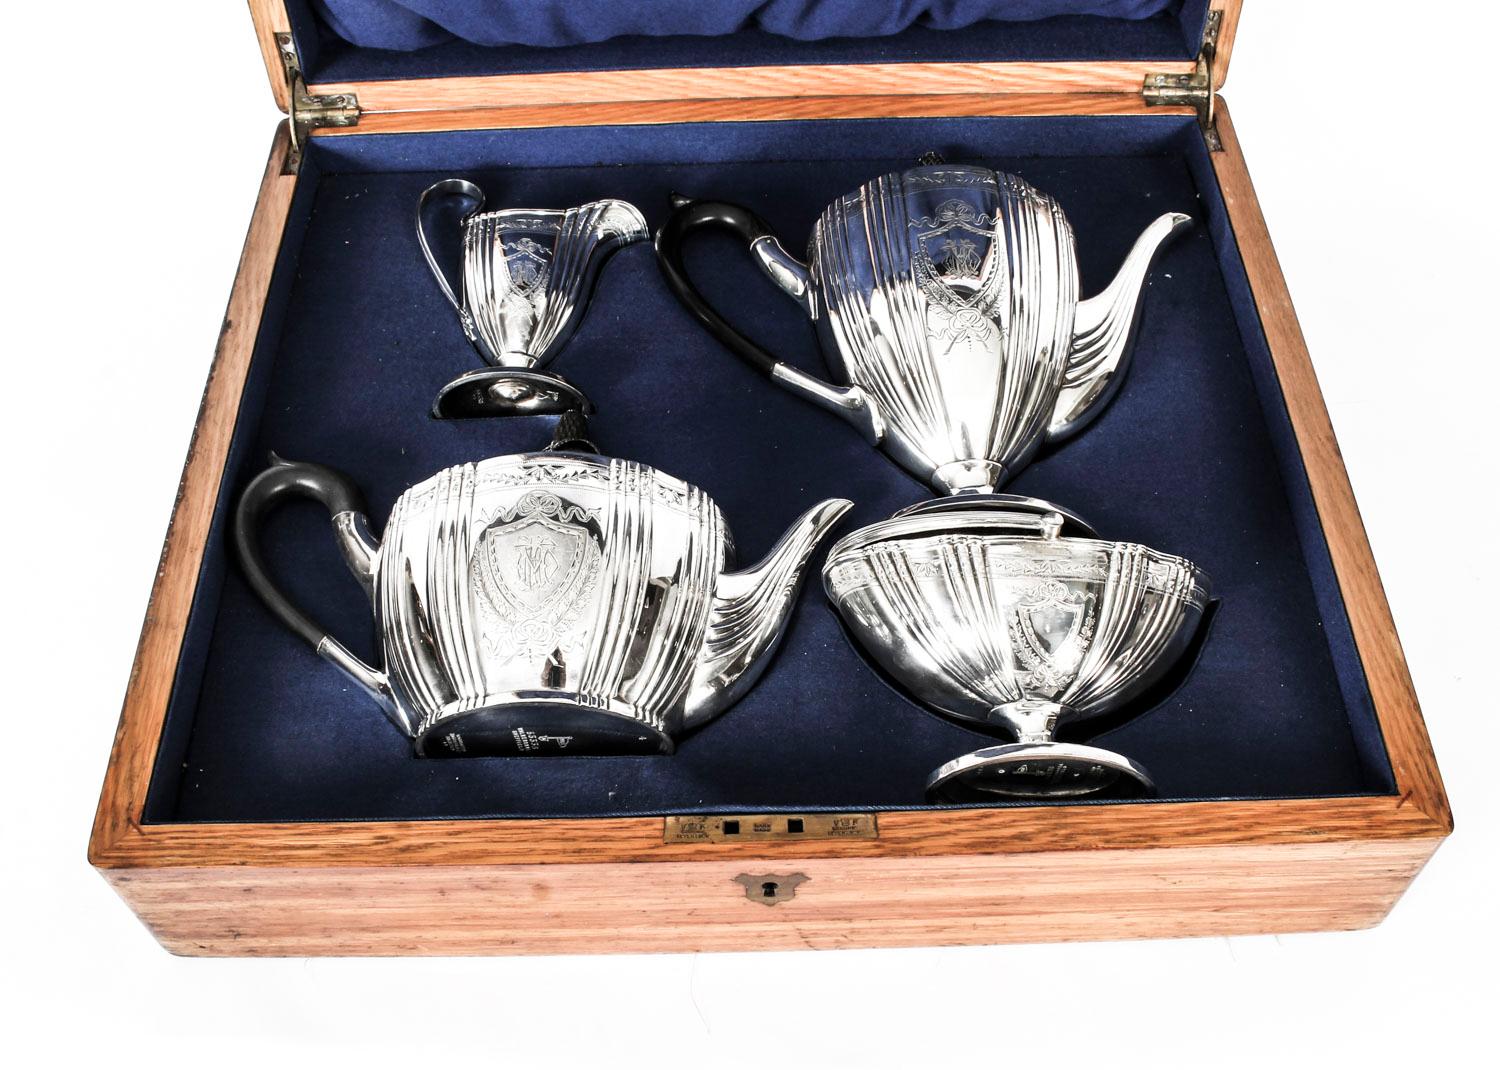 An exquisite antique English Victorian silver plate cased tea set, with the makers mark of the renowned silversmith Walker & Hall, Sheffield, circa 1860 in date.
 
This rare complete set is in superb condition in the neoclassical style and